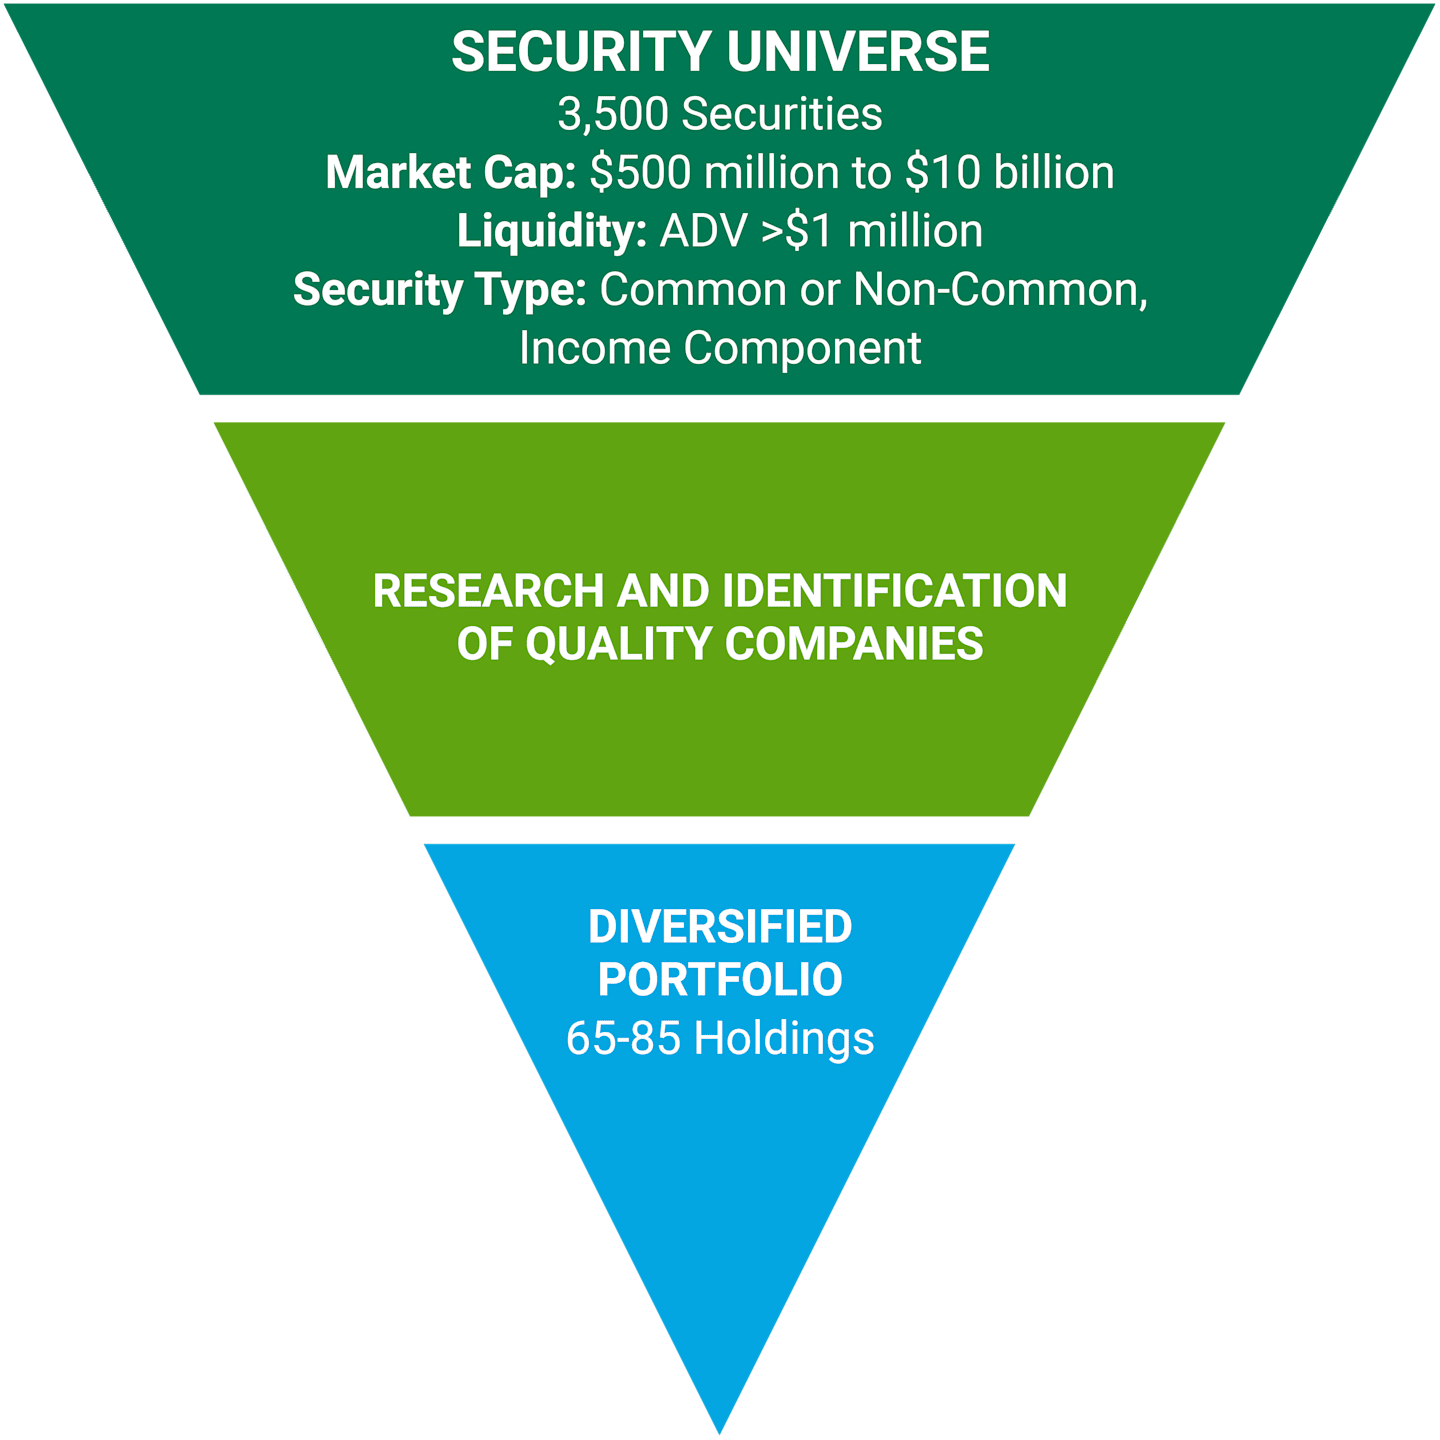 Security Universe: 3,500 securities, $500M - $10B market cap, liquidity ADV  >$1M, security type common or non-common, income component. Research and identification of quality companies. Diversified portfolio: 65-85 holdings. 